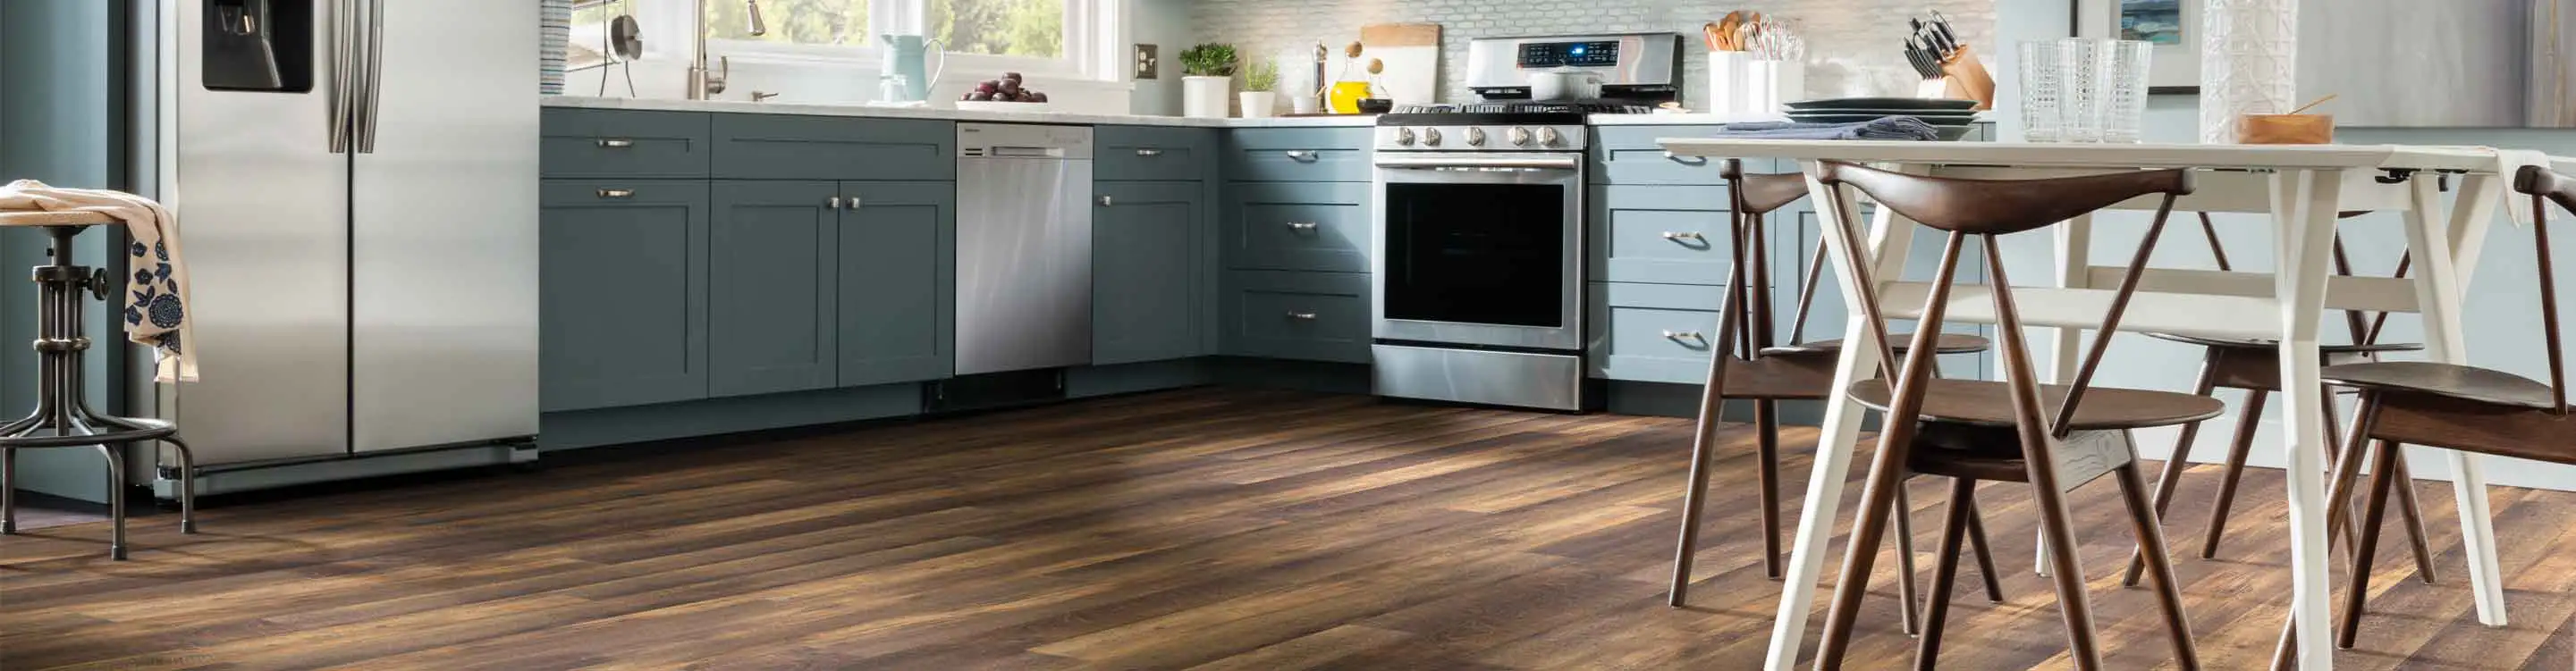 dark vinyl plank wood look flooring in kitchen with blue cabinets and dining table